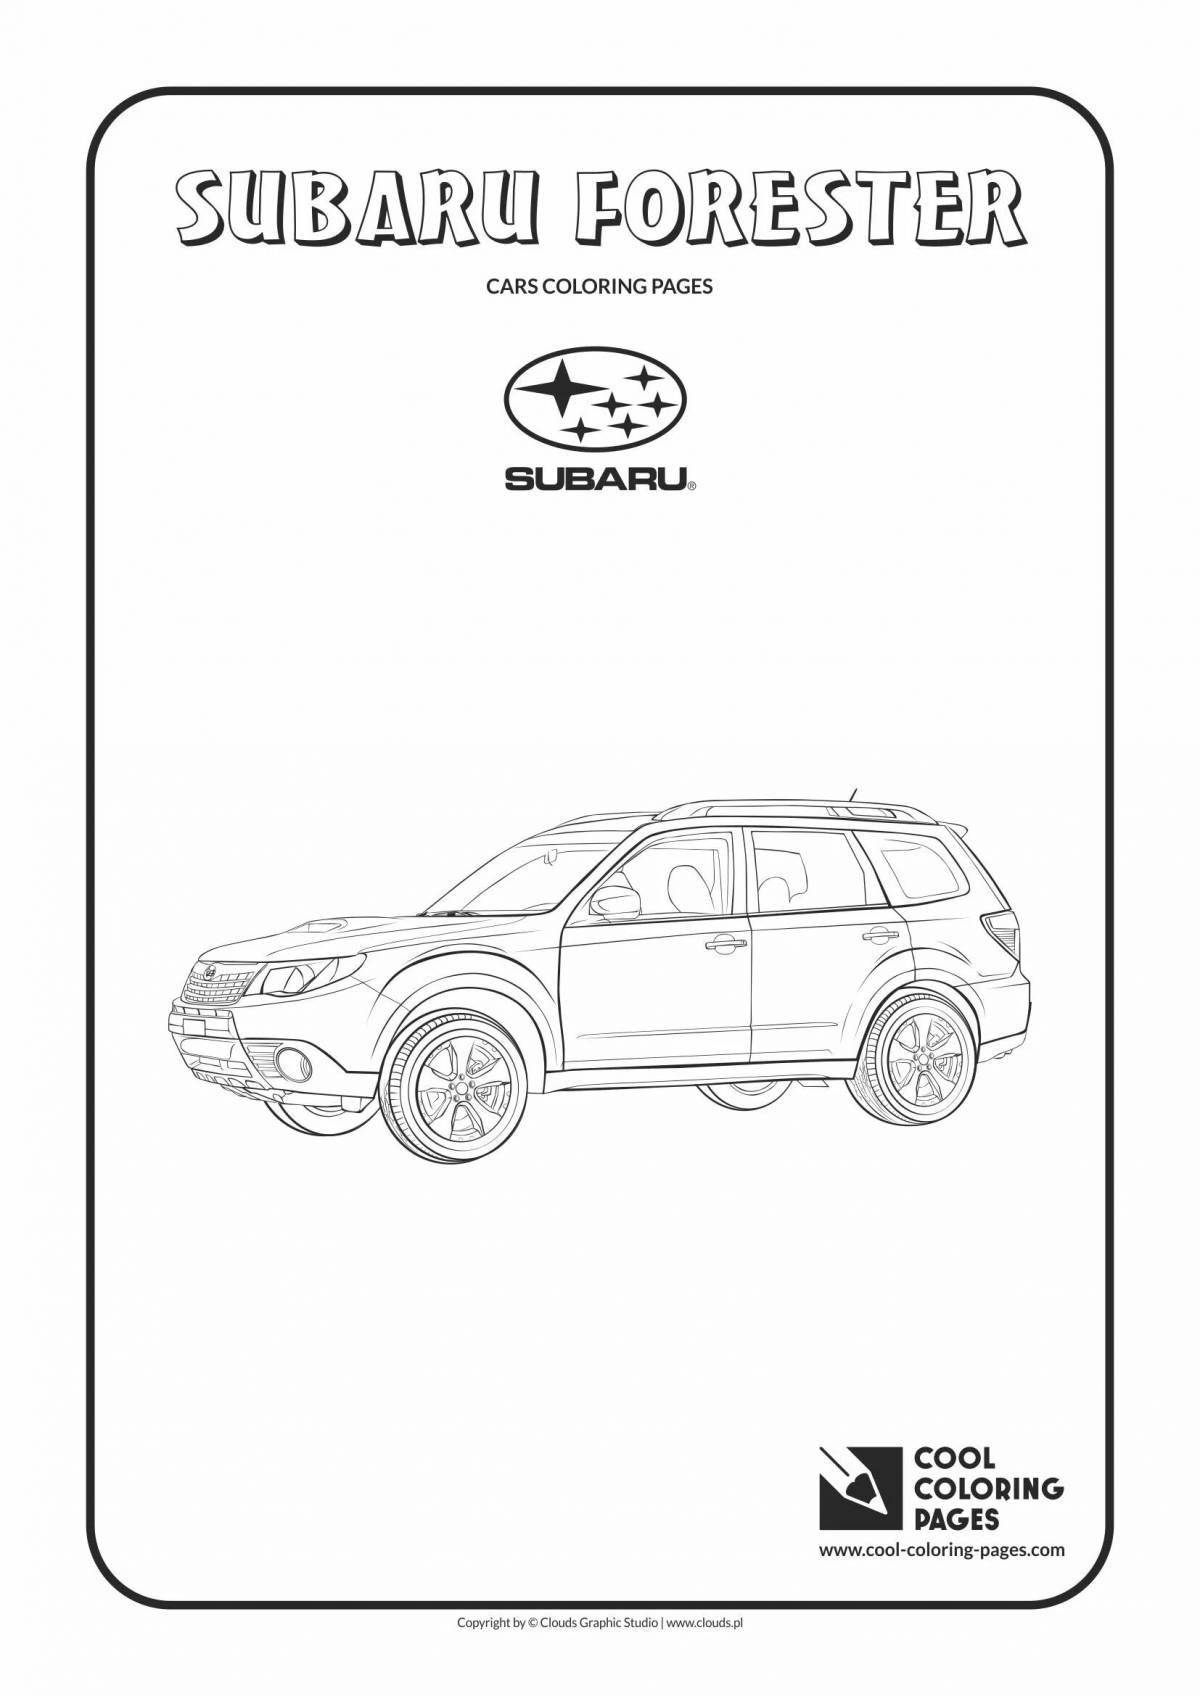 Subaru forester intriguing coloring